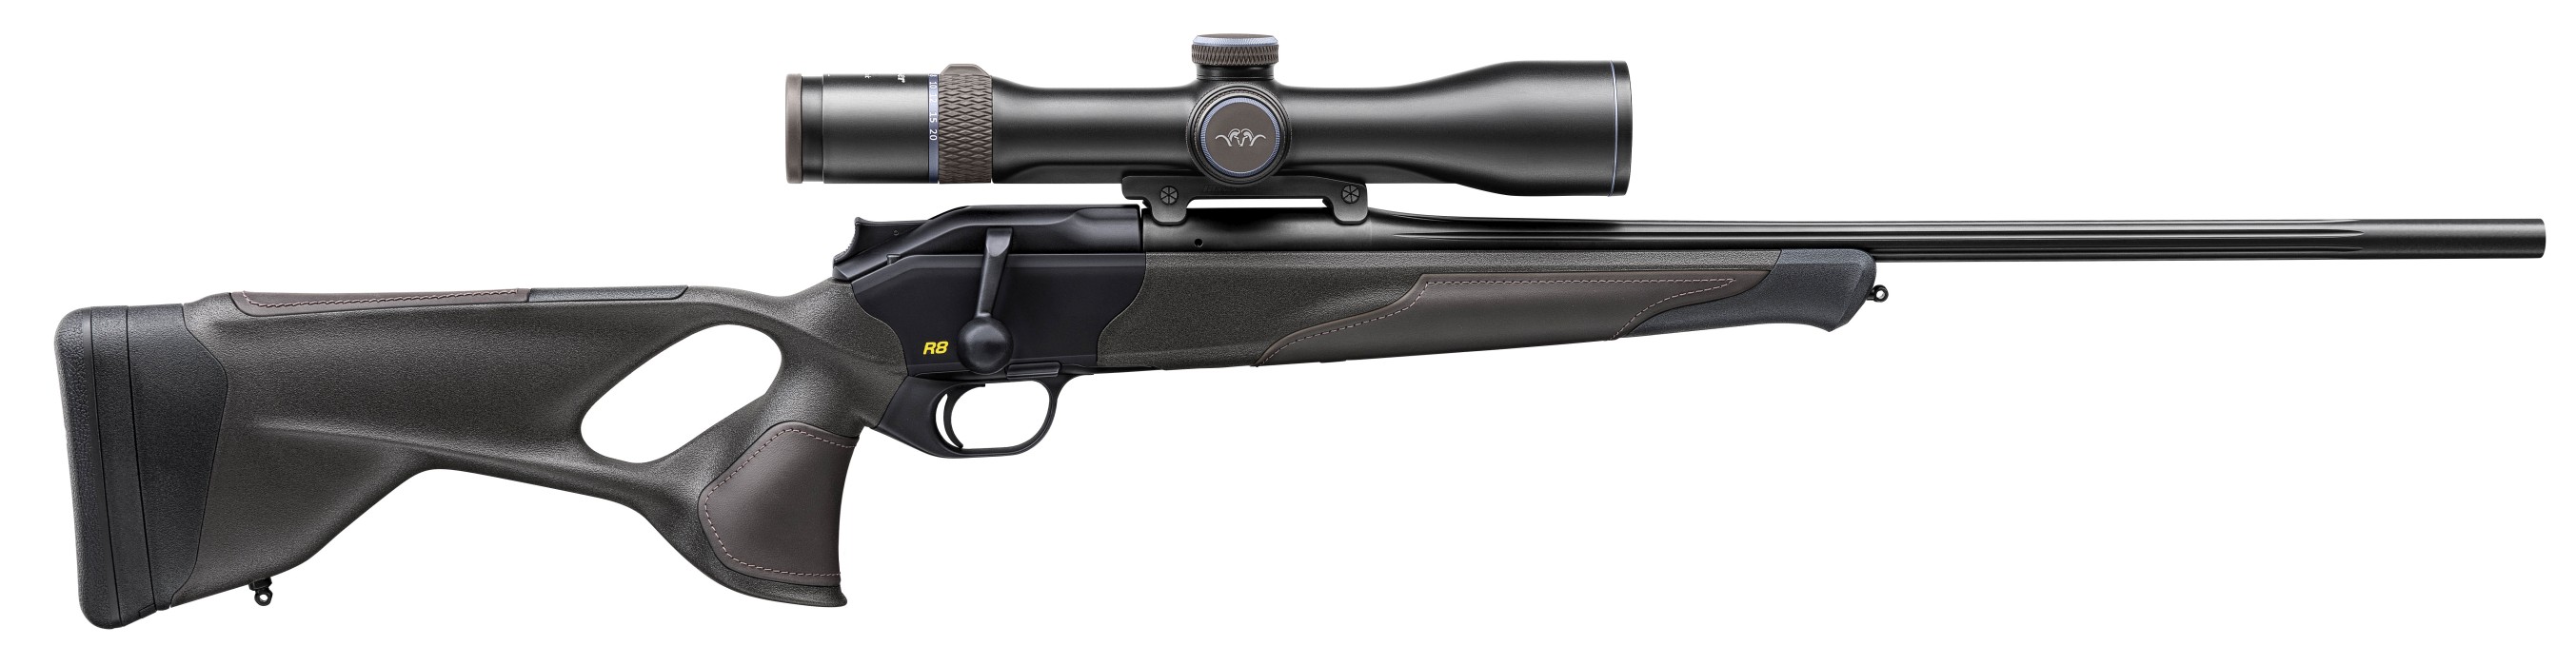 Blaser R8 Ultimate Leather AC